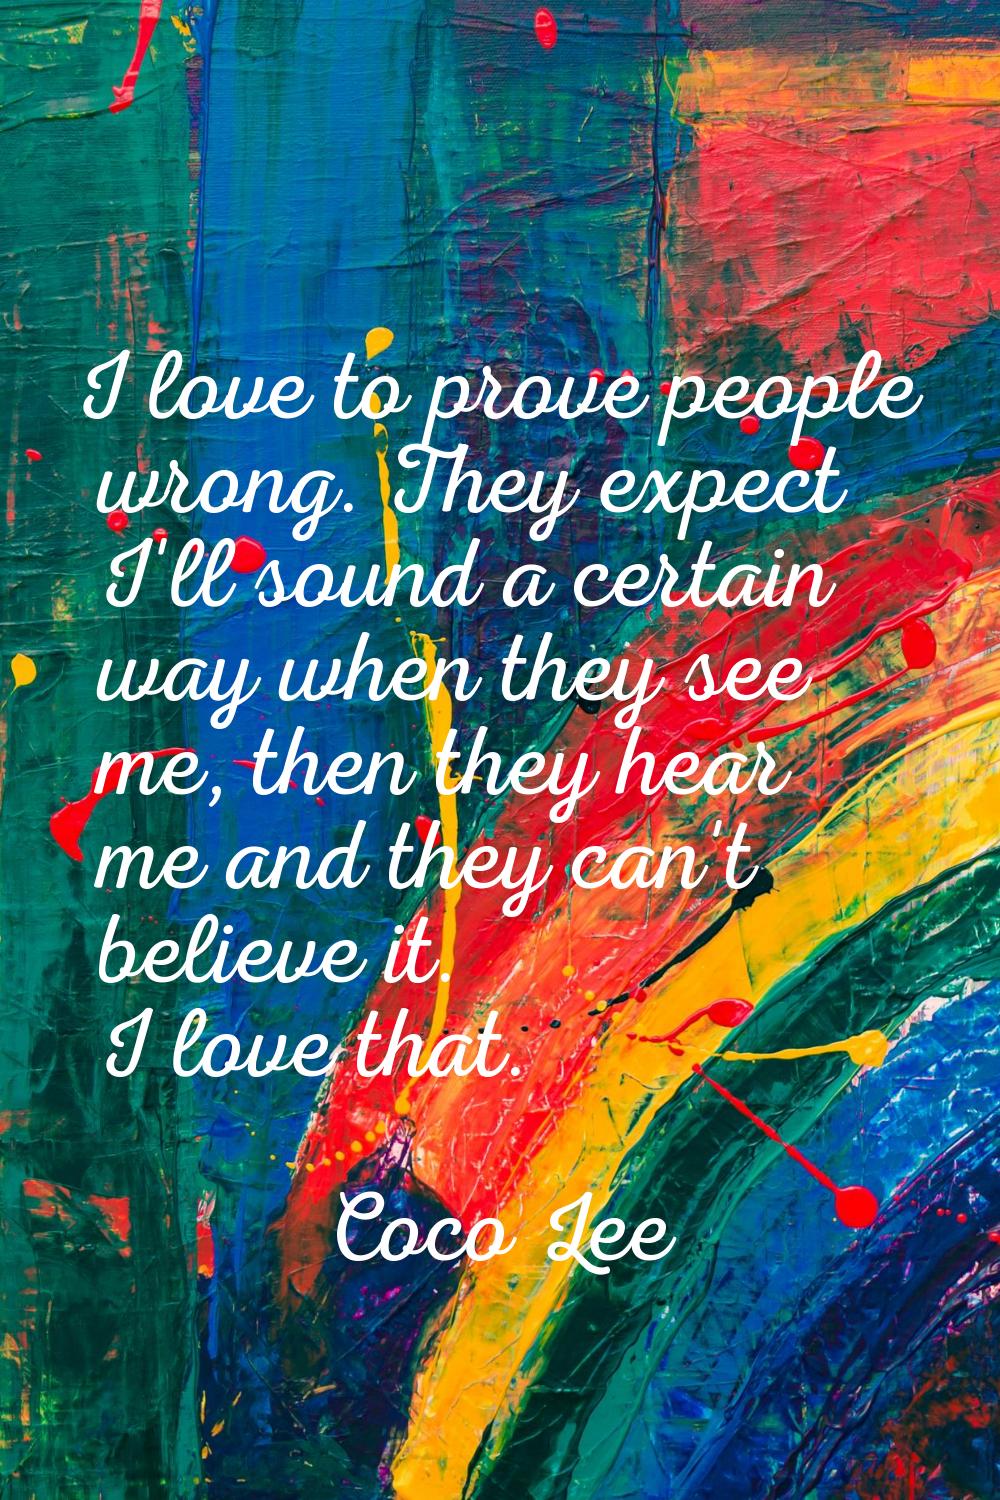 I love to prove people wrong. They expect I'll sound a certain way when they see me, then they hear